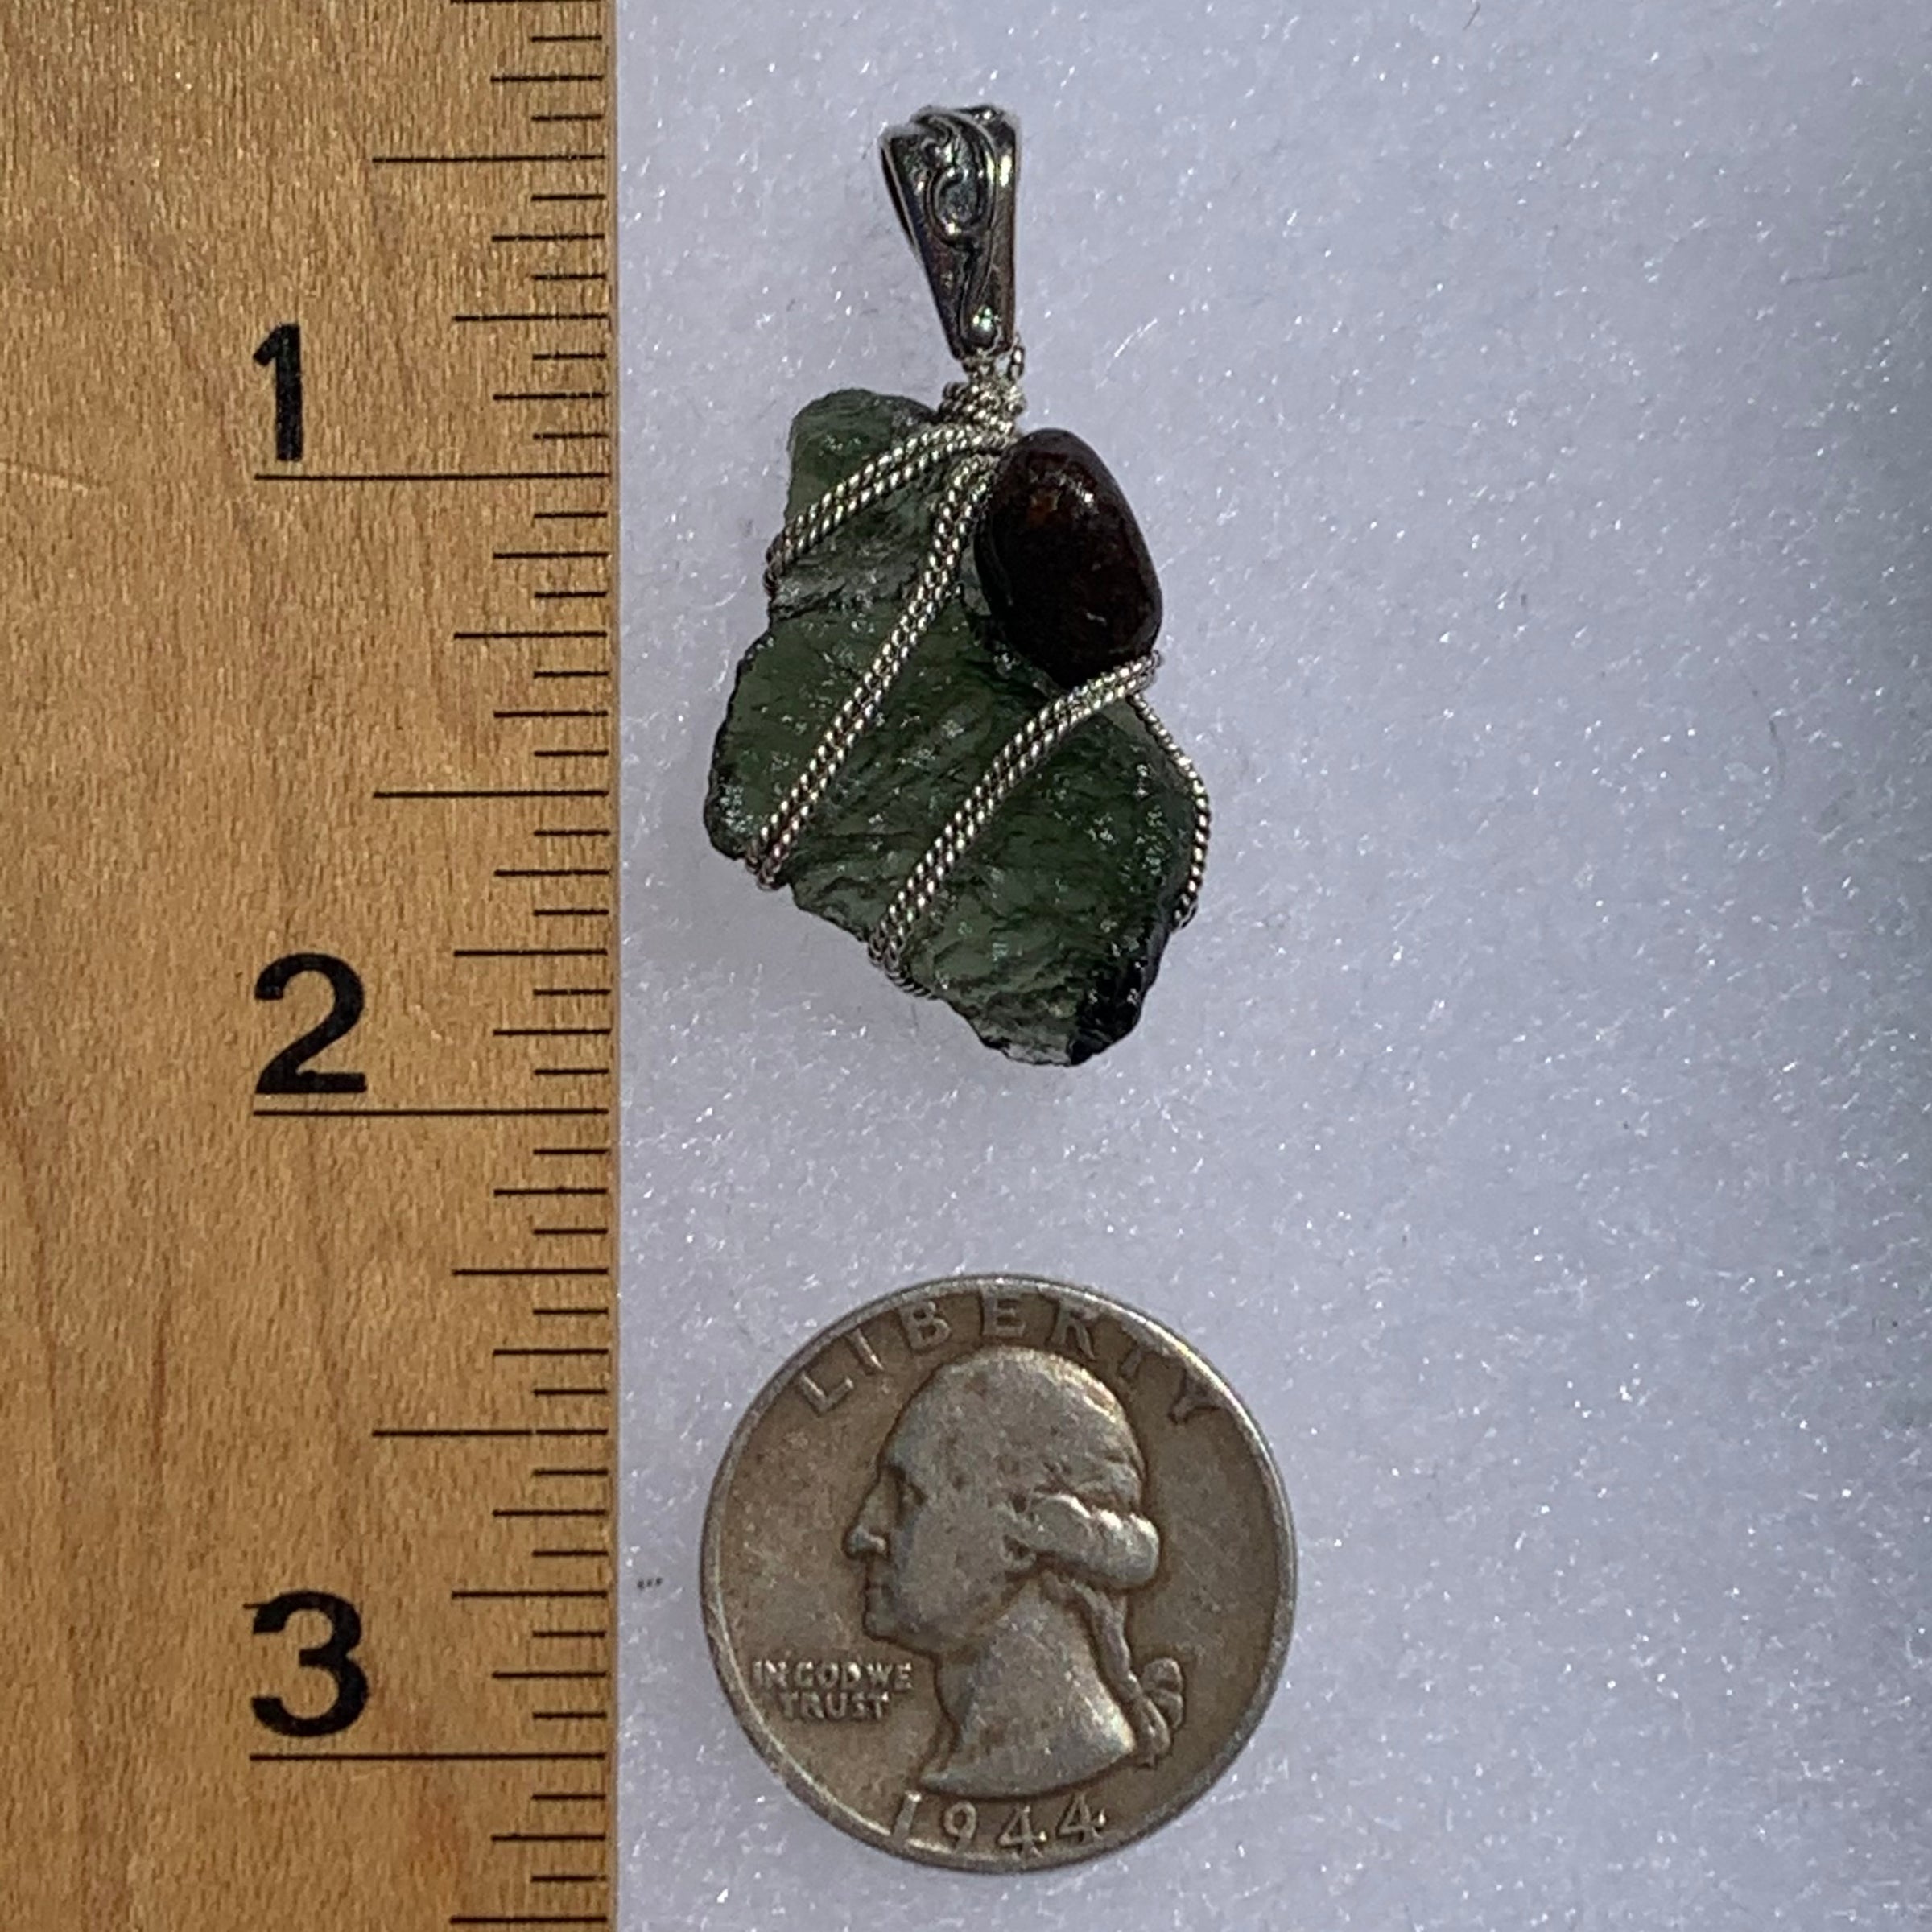 raw moldavite tektite and nwa 869 meteorite bead sterling silver wire wrapped pendant next to a ruler and US quarter for scale